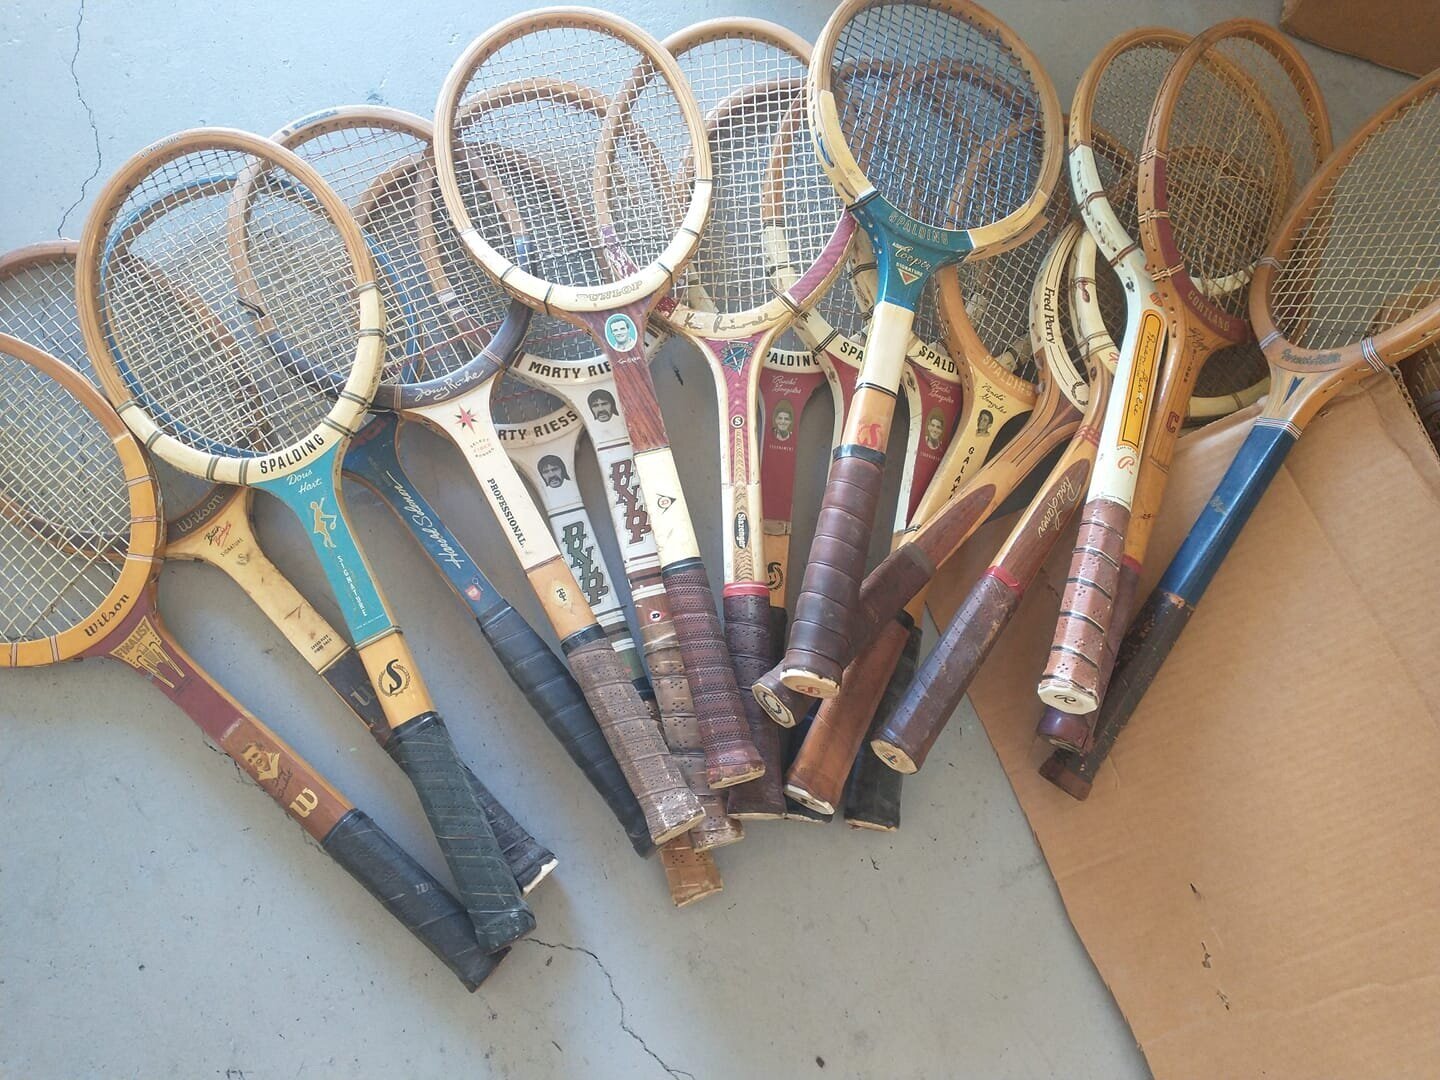 A 'Tennis Purist", Gary has a vast collection of rare tennis memorabilia and tennis equipment dating back to the 1800s.